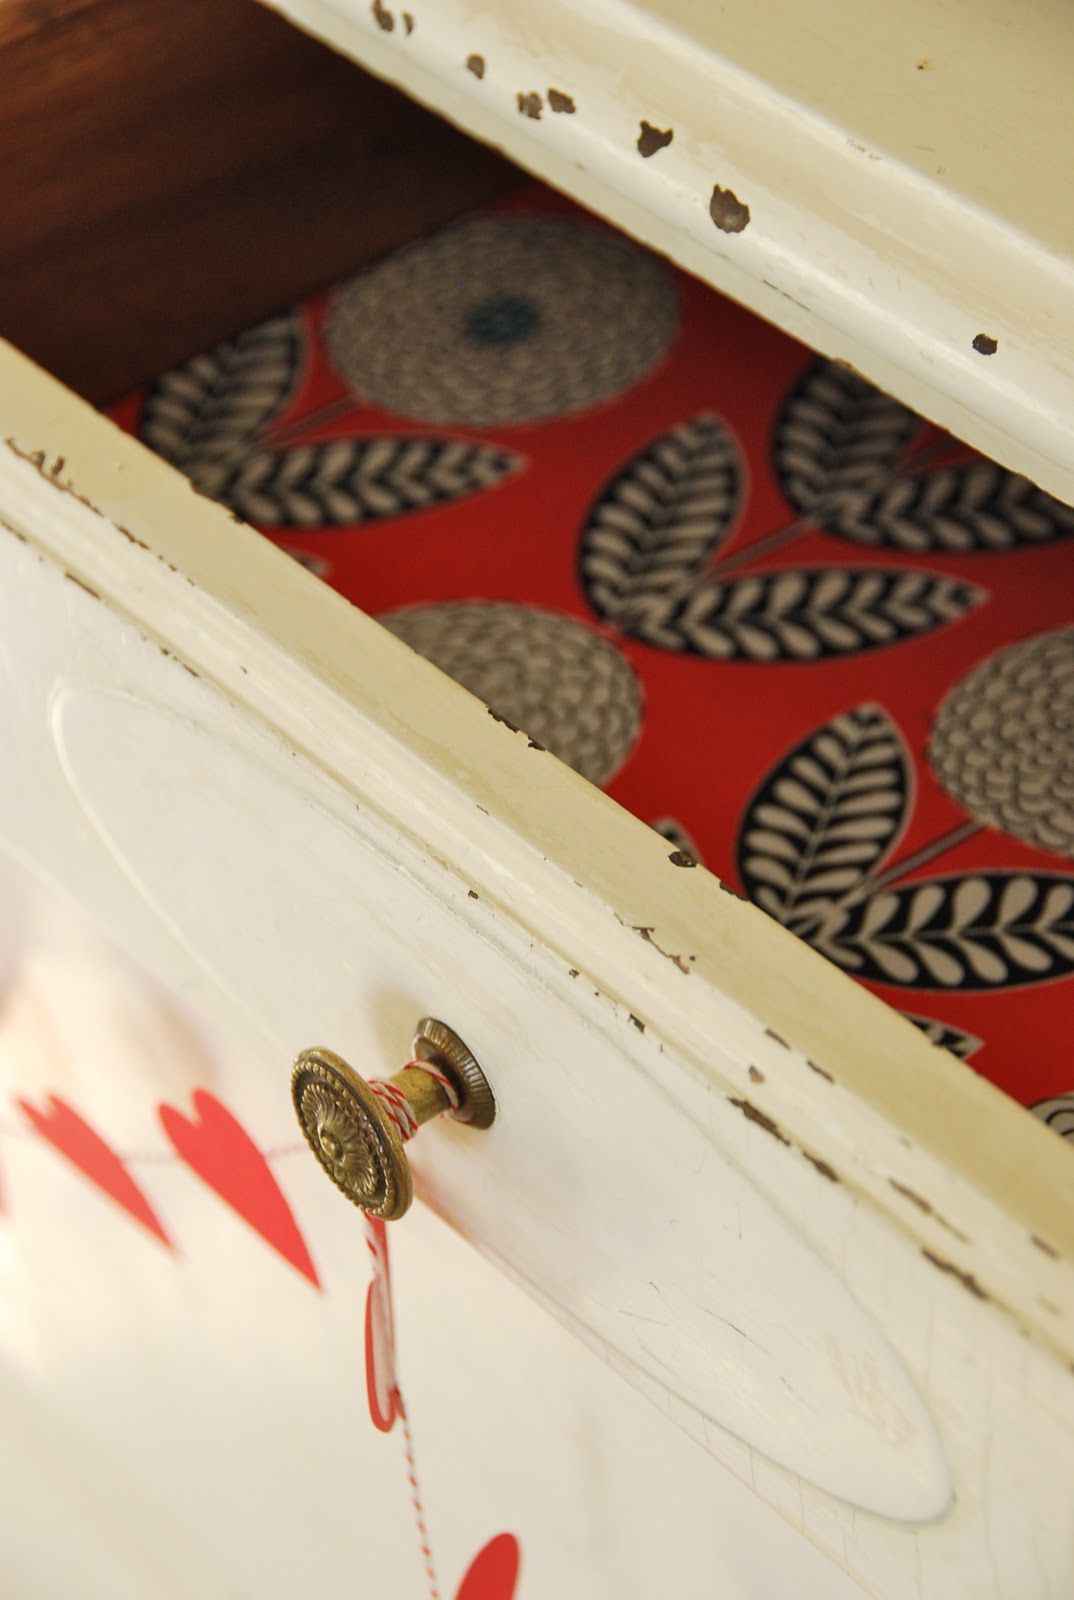 DIY Fabric Drawer Liners {Paper-like, Stain-Resistant & Scented}